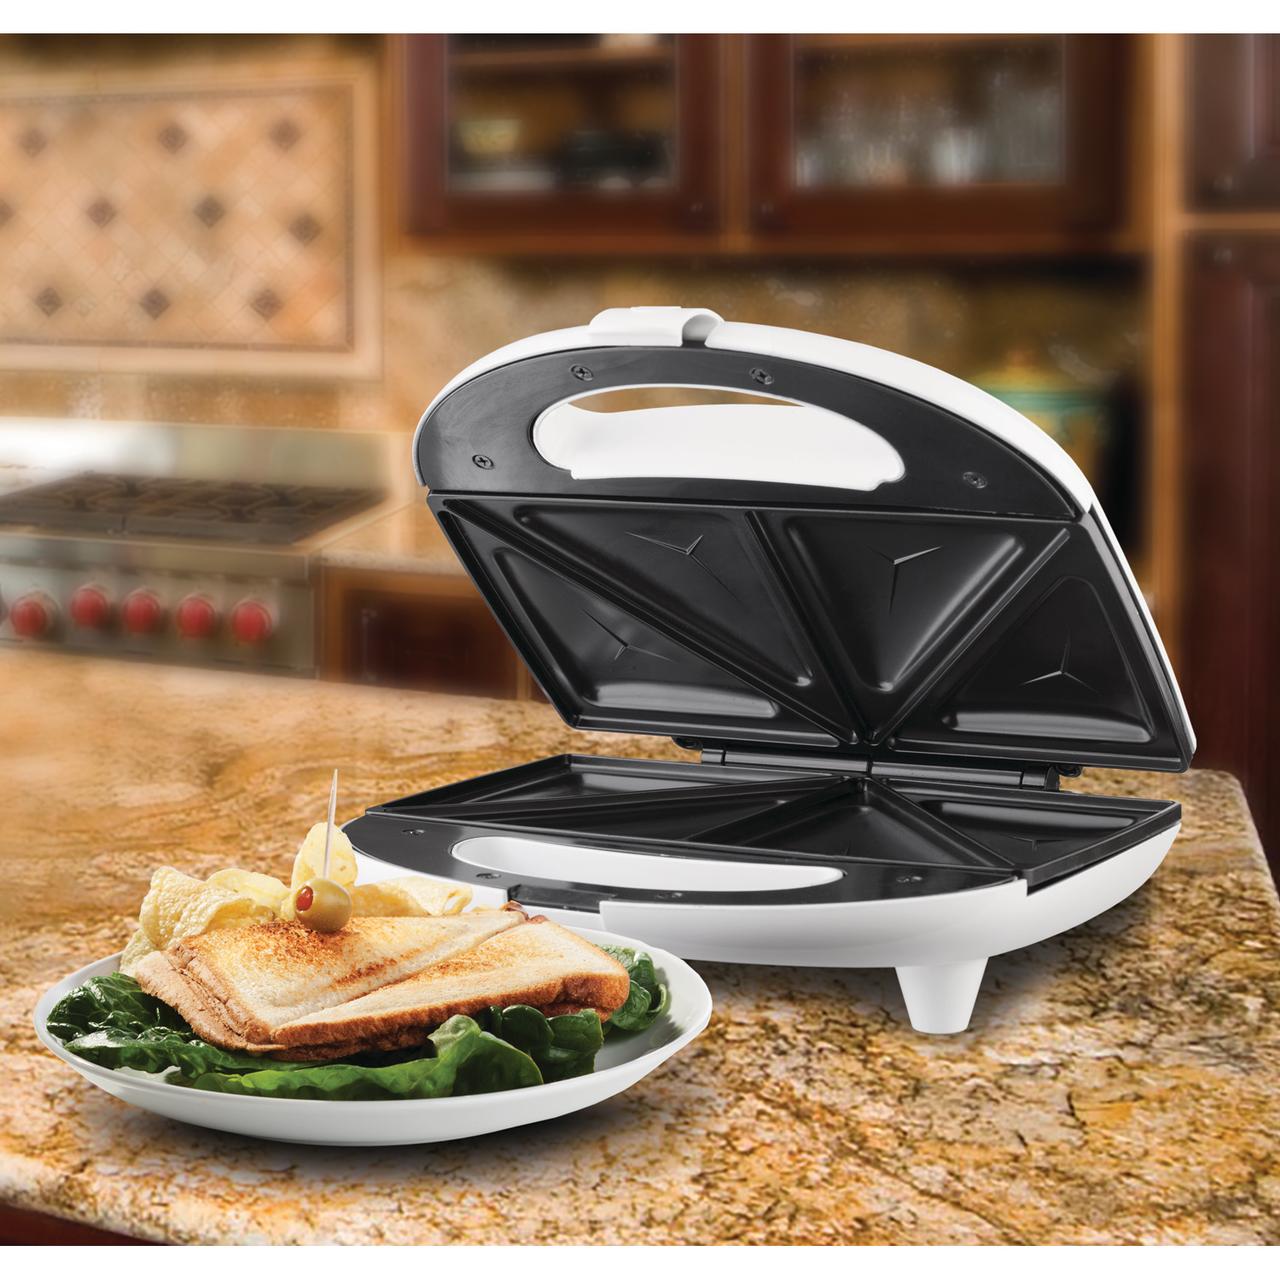 Brentwood Appliances TS-240W Nonstick Compact Dual Sandwich Maker (White) - image 3 of 3